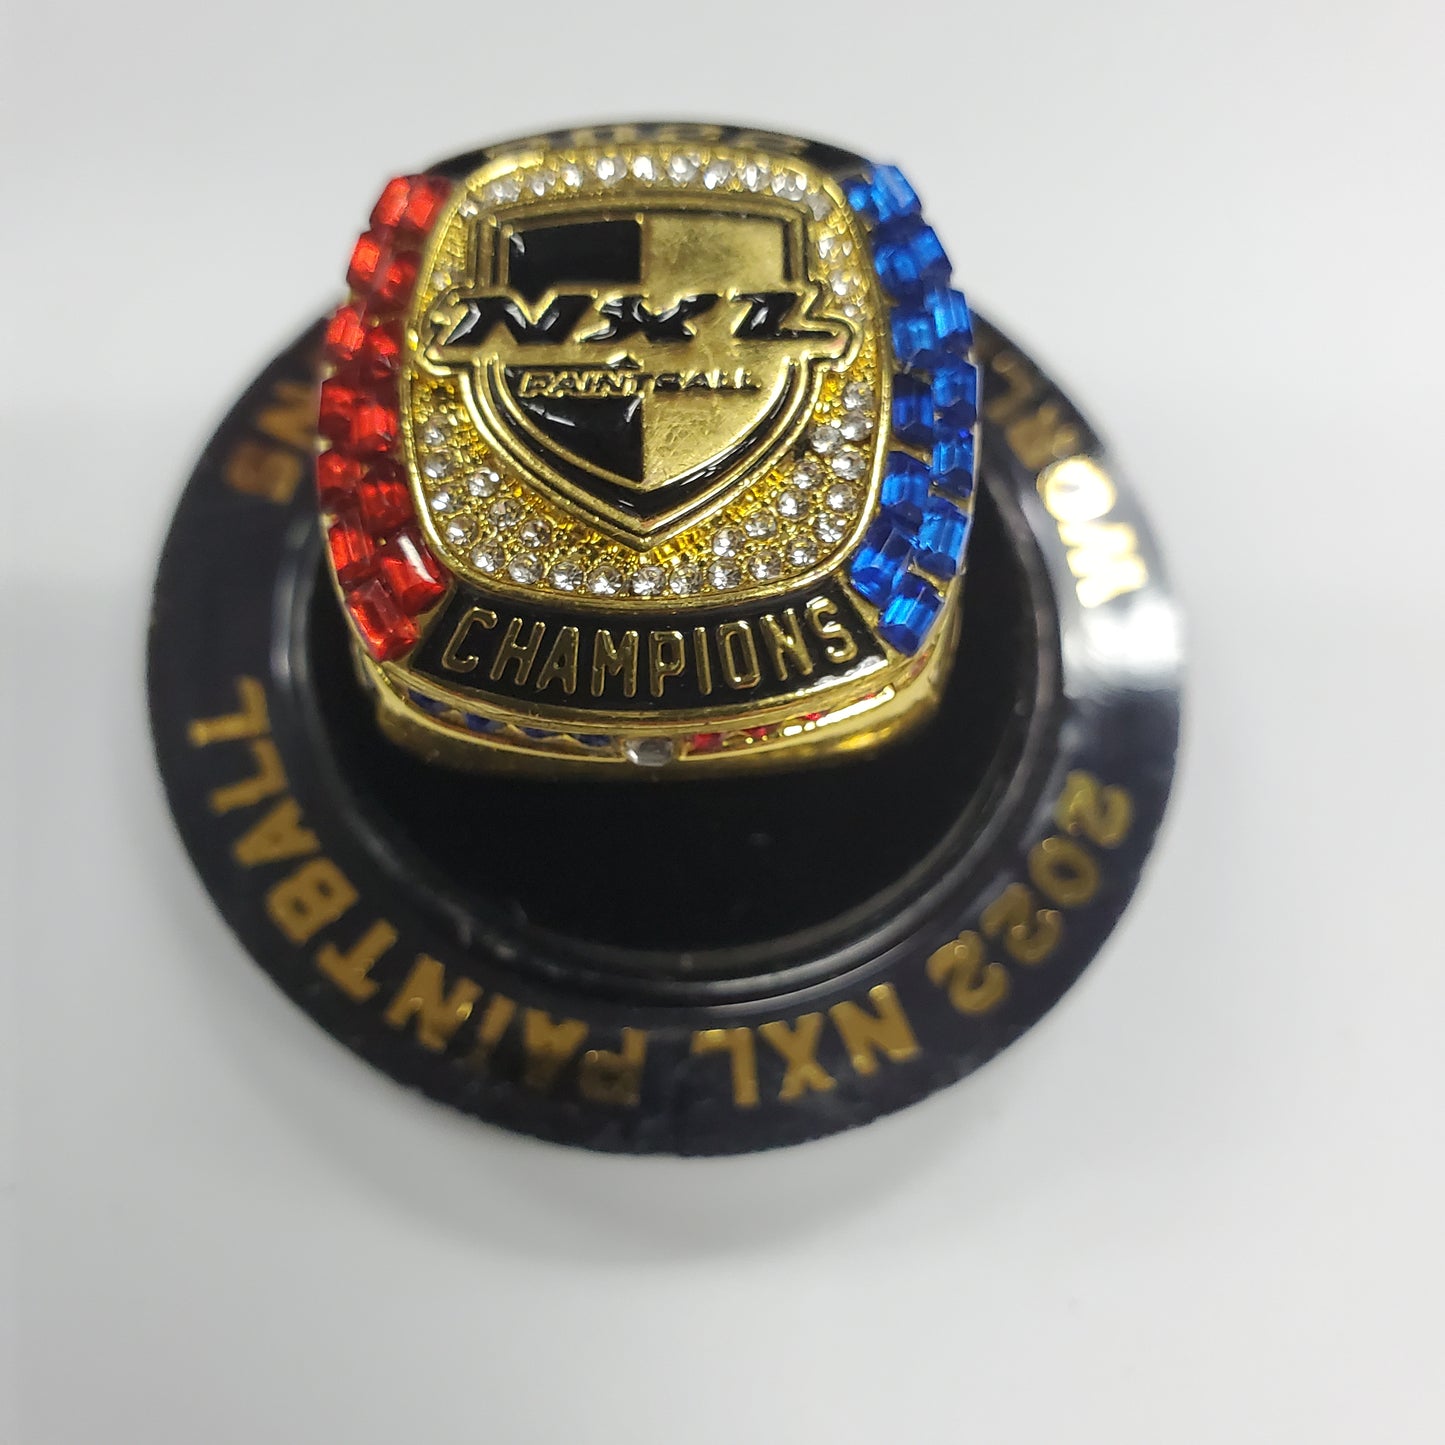 2022 World Cup Championship ring.